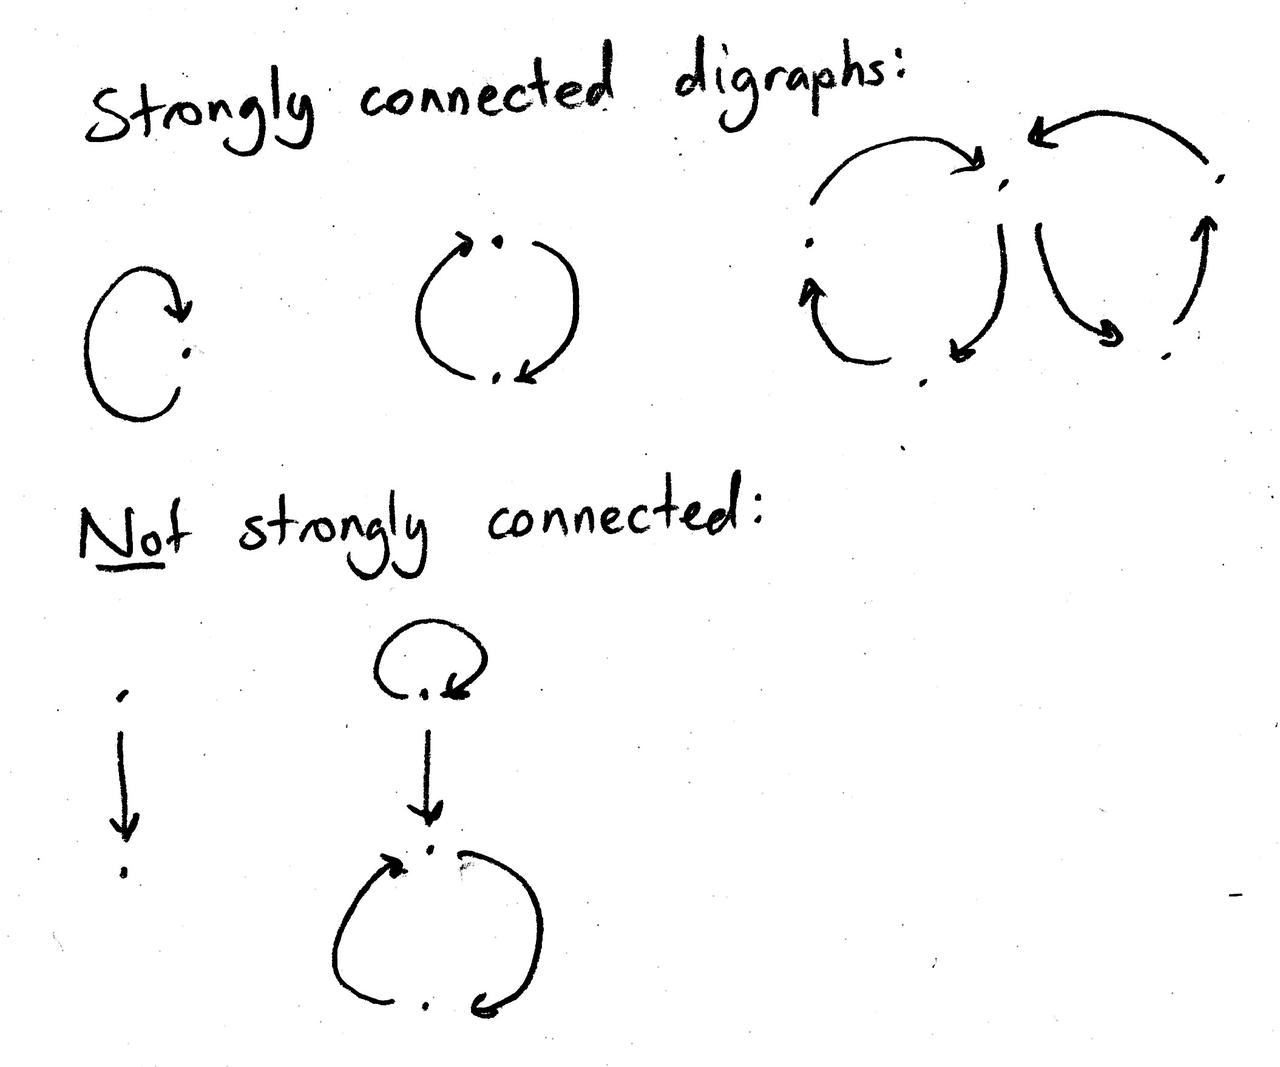 Examples and counterexamples of strongly connected digraphs. The positive examples are single node with a loop, two nodes pointing to each other, and two directed 3-cycles connecting at a single node. The negative examples are a digraph with a single edge, and a loop that feeds unidirectionally into a directed 2-cycle.